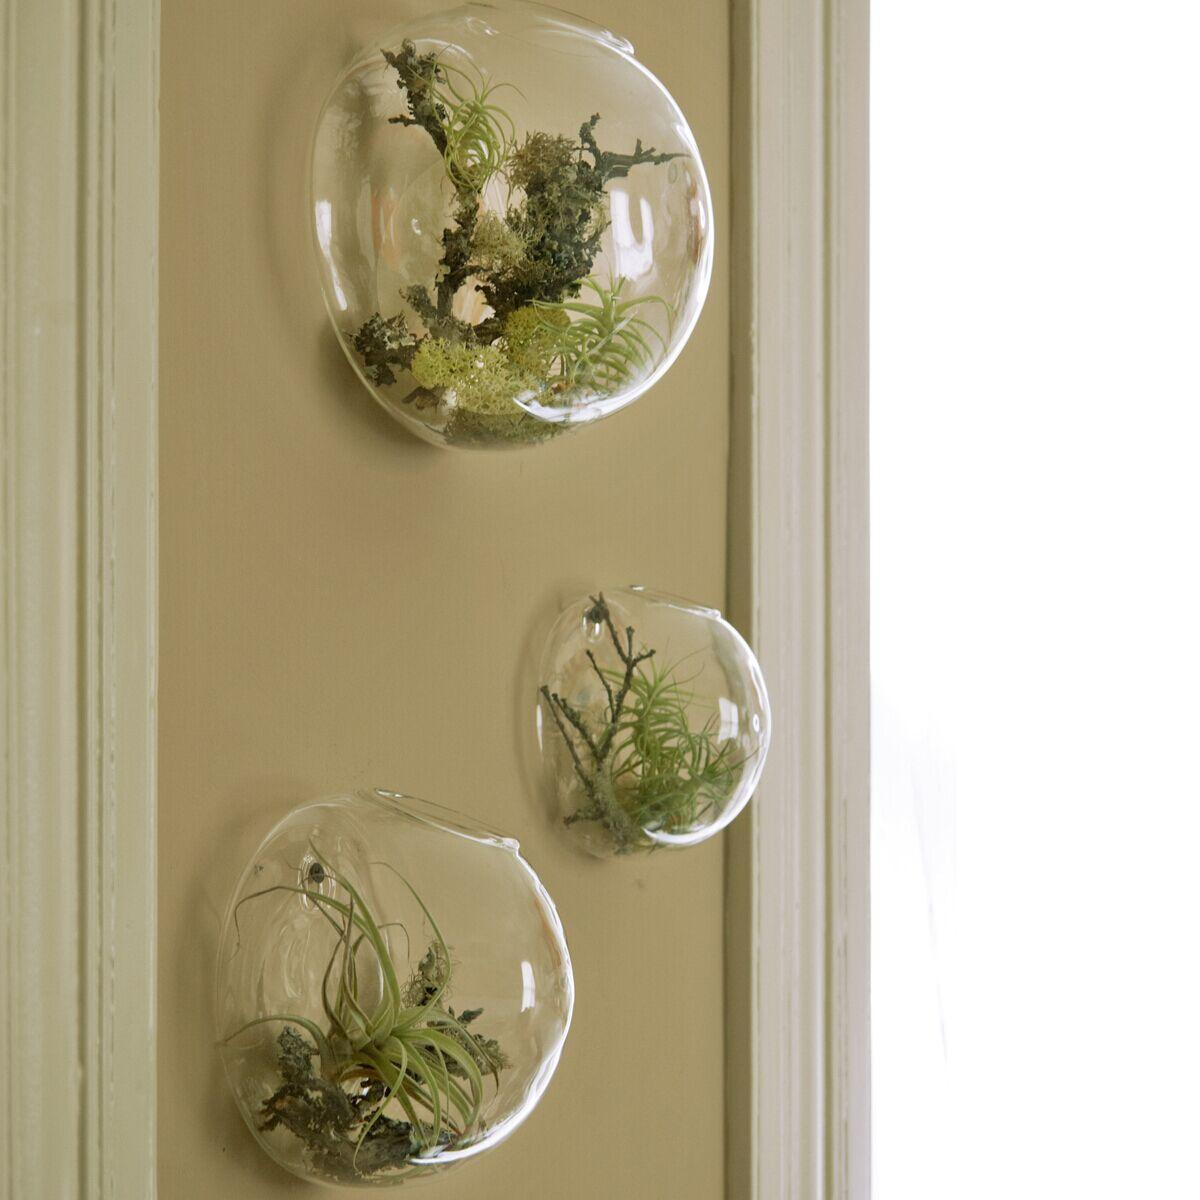 11 Wonderful Low Round Glass Vase 2024 free download low round glass vase of wall bubble terrariums glass wall vase for flowers indoor plants intended for wall bubble terrariums glass wall vase for flowers indoor plants wall mounted planter fo